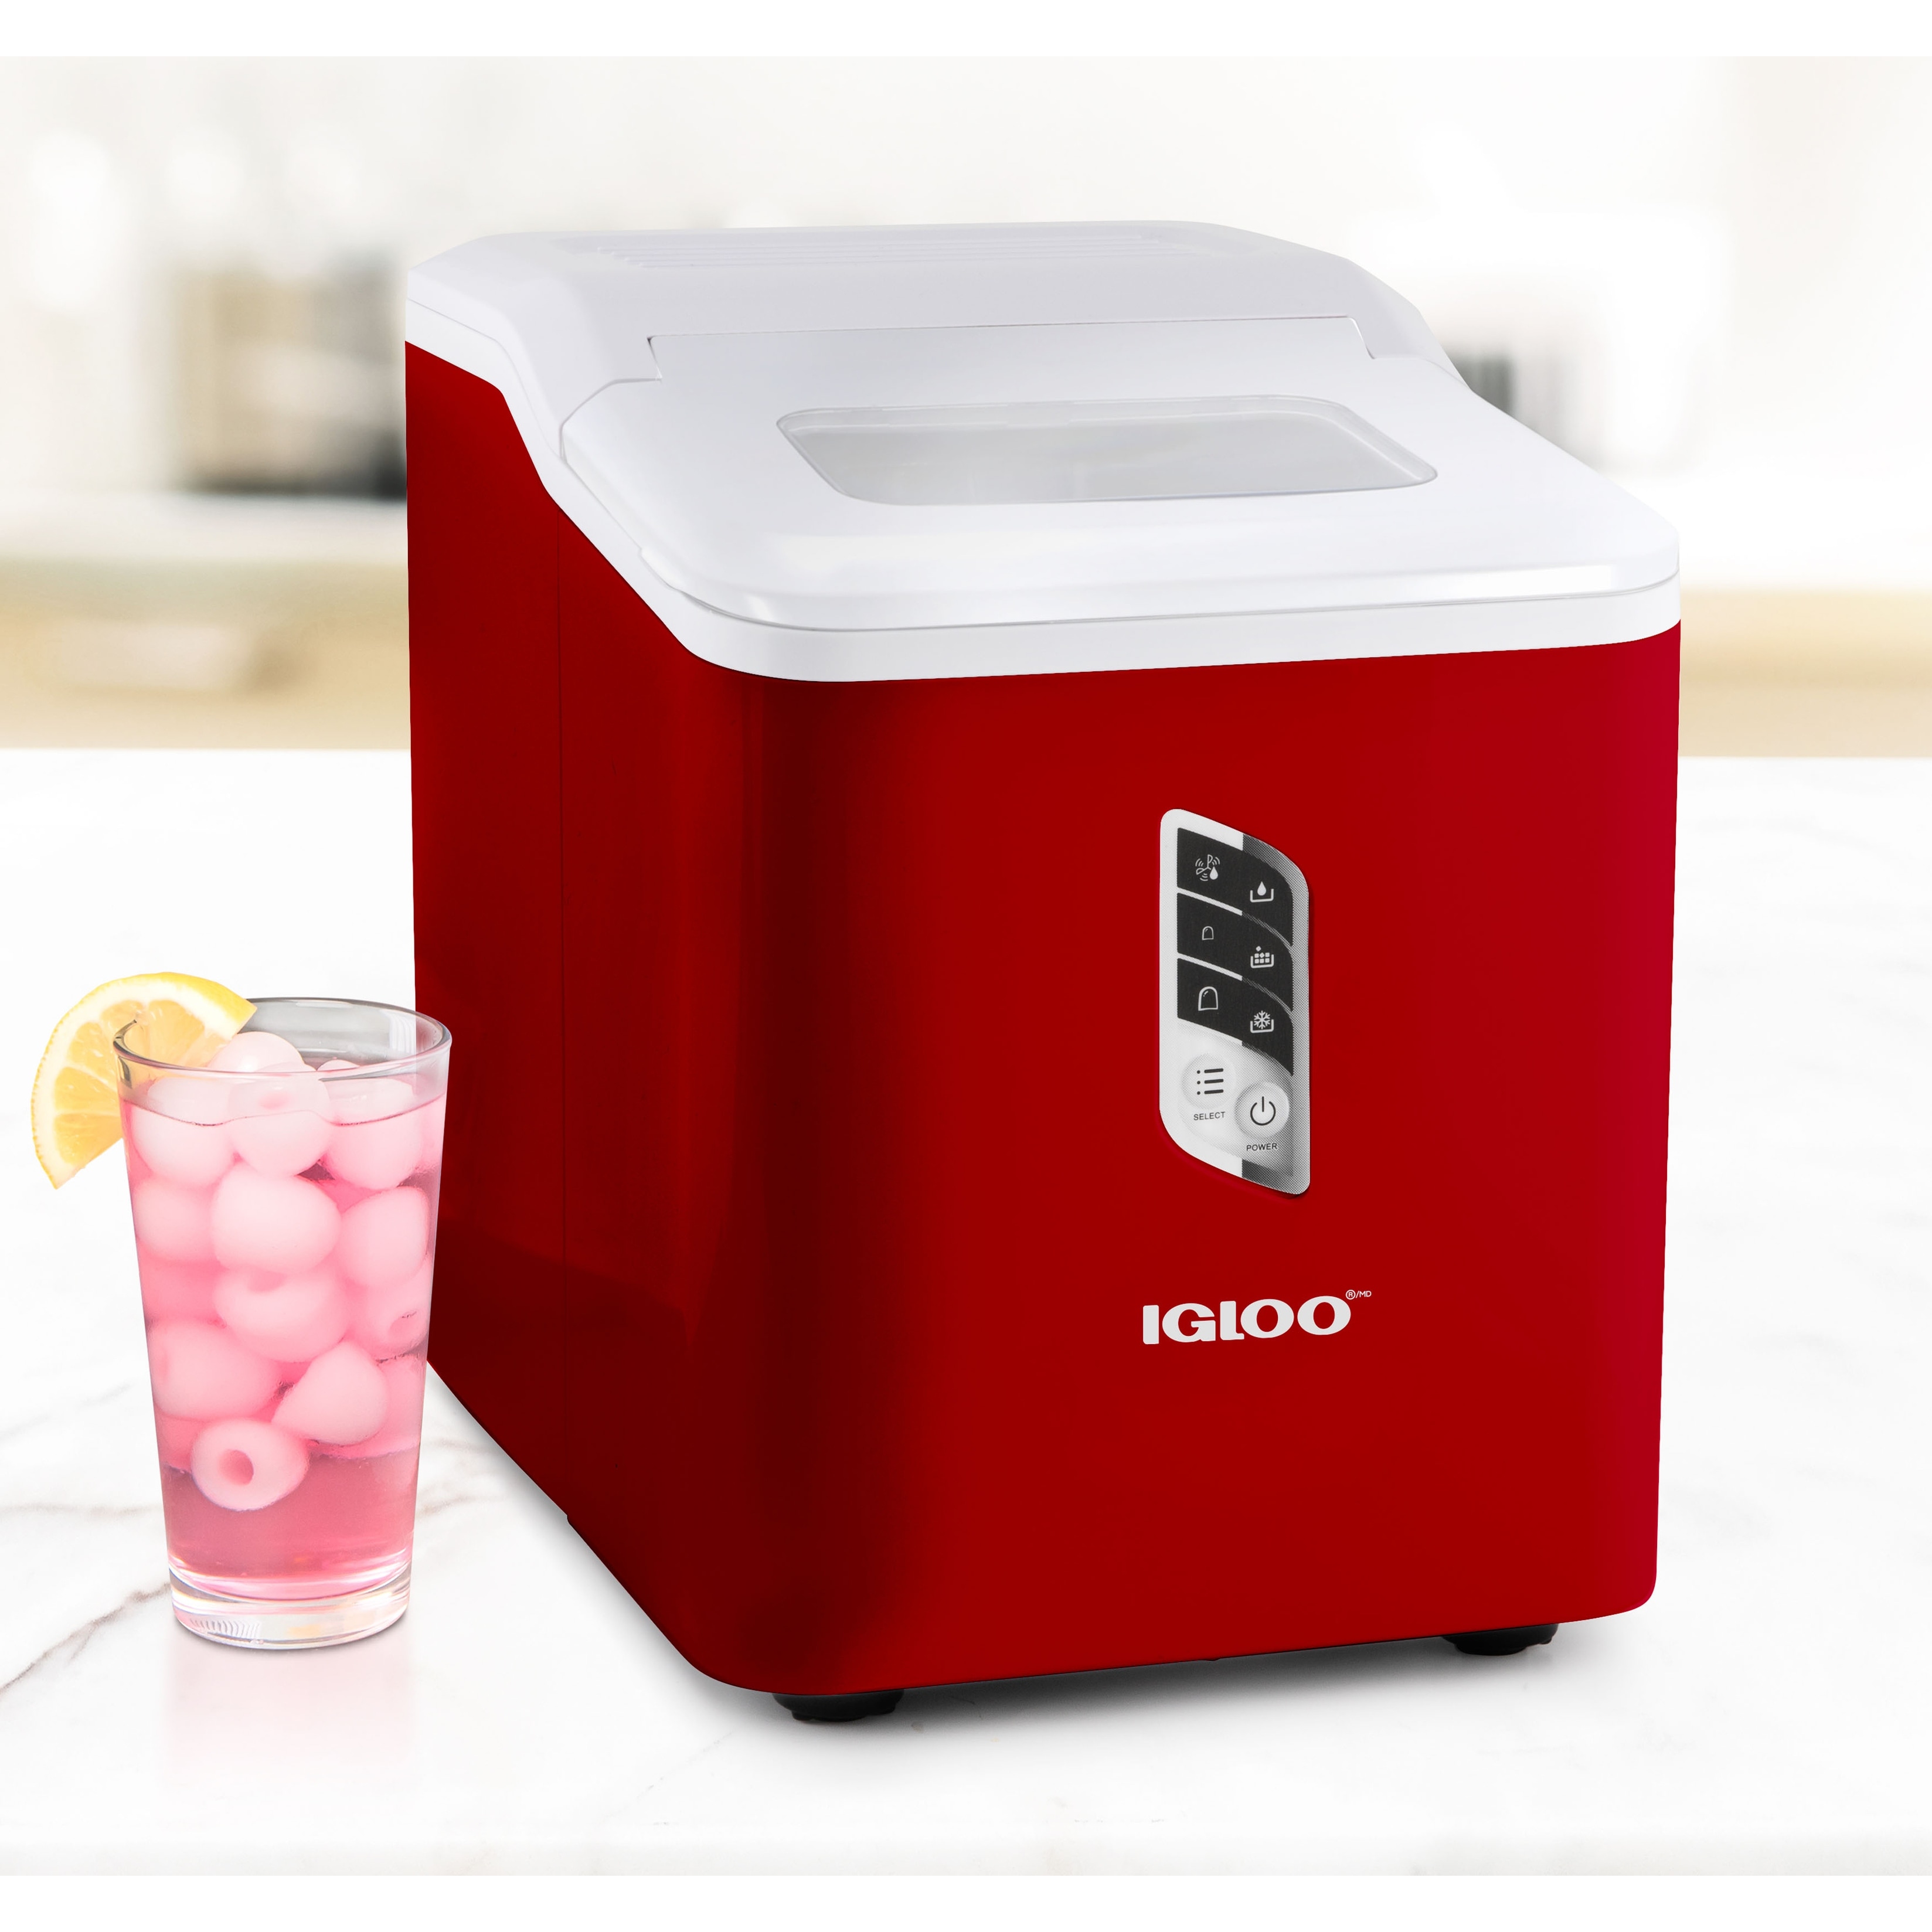 Igloo Automatic Self-Cleaning 26-Pound Ice Maker - Bed Bath